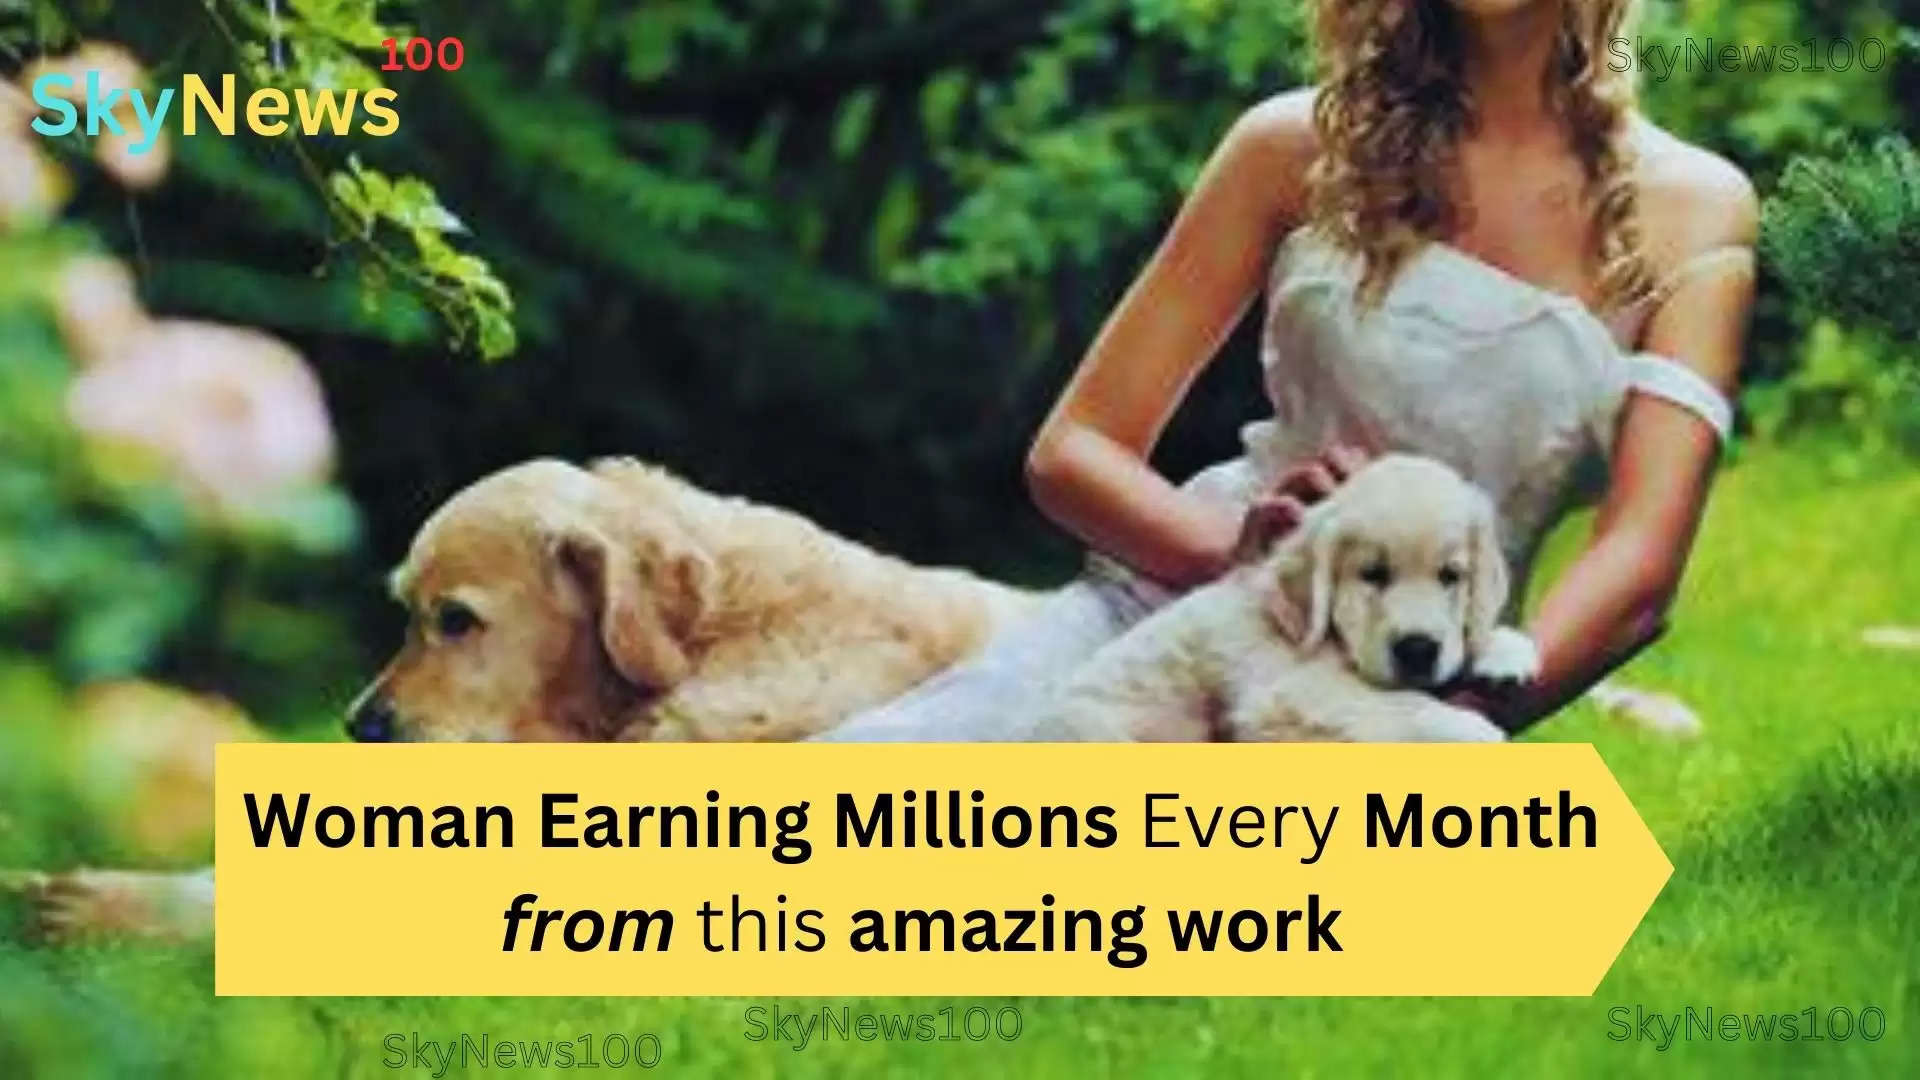 Woman Earning Millions Every Month from this amazing work